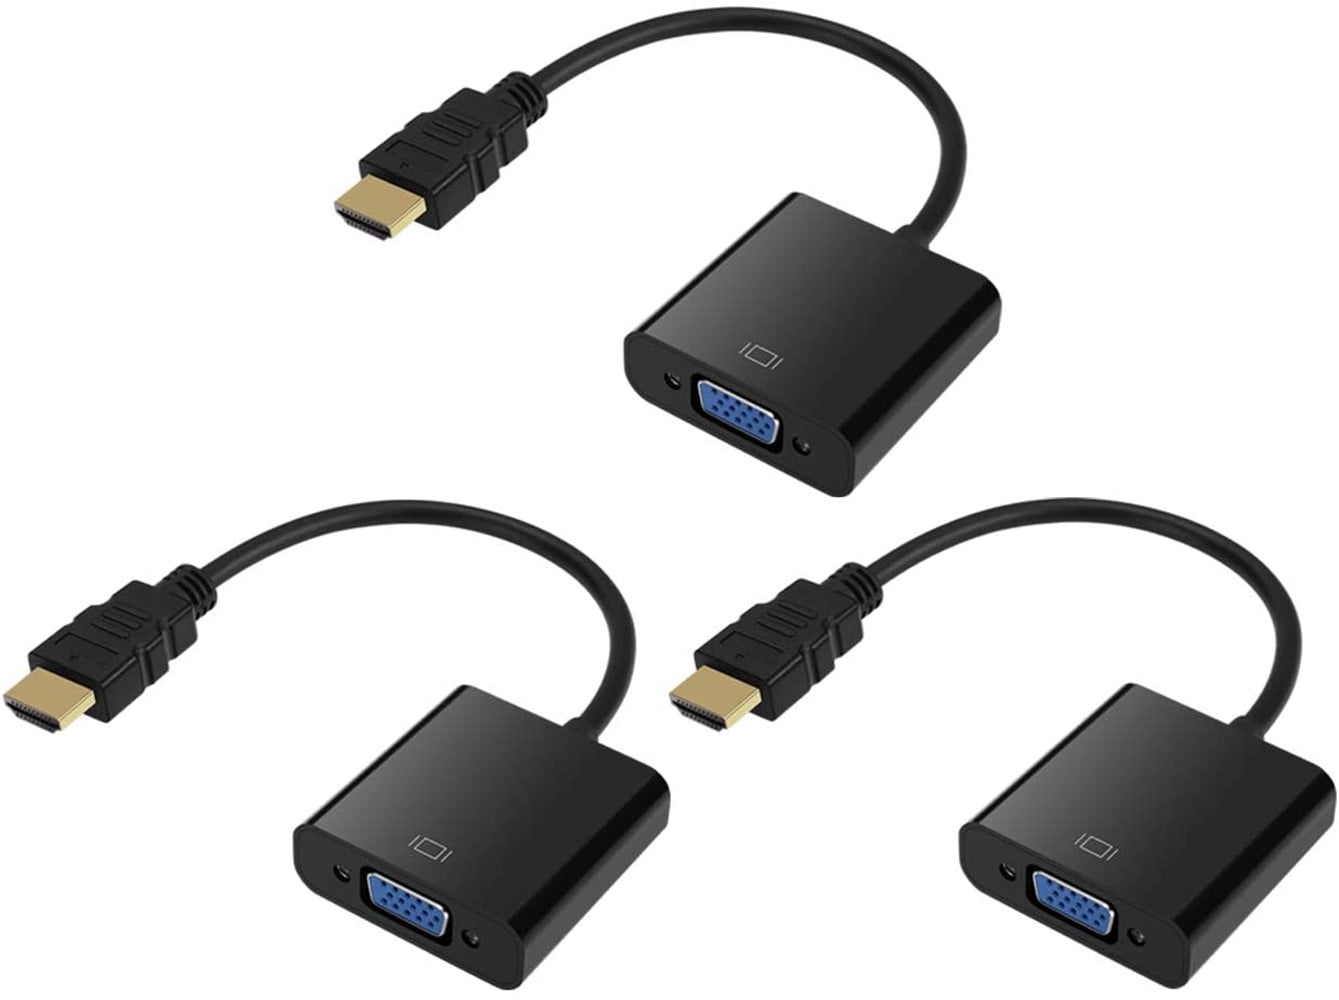 SHULIANCABLE HDMI to VGA, HDMI to VGA Adapter (Female to Male) Compatible  with Monitor, PC, Xbox, TV Stick, Raspberry Pi, Roku, Computer, Laptop (6